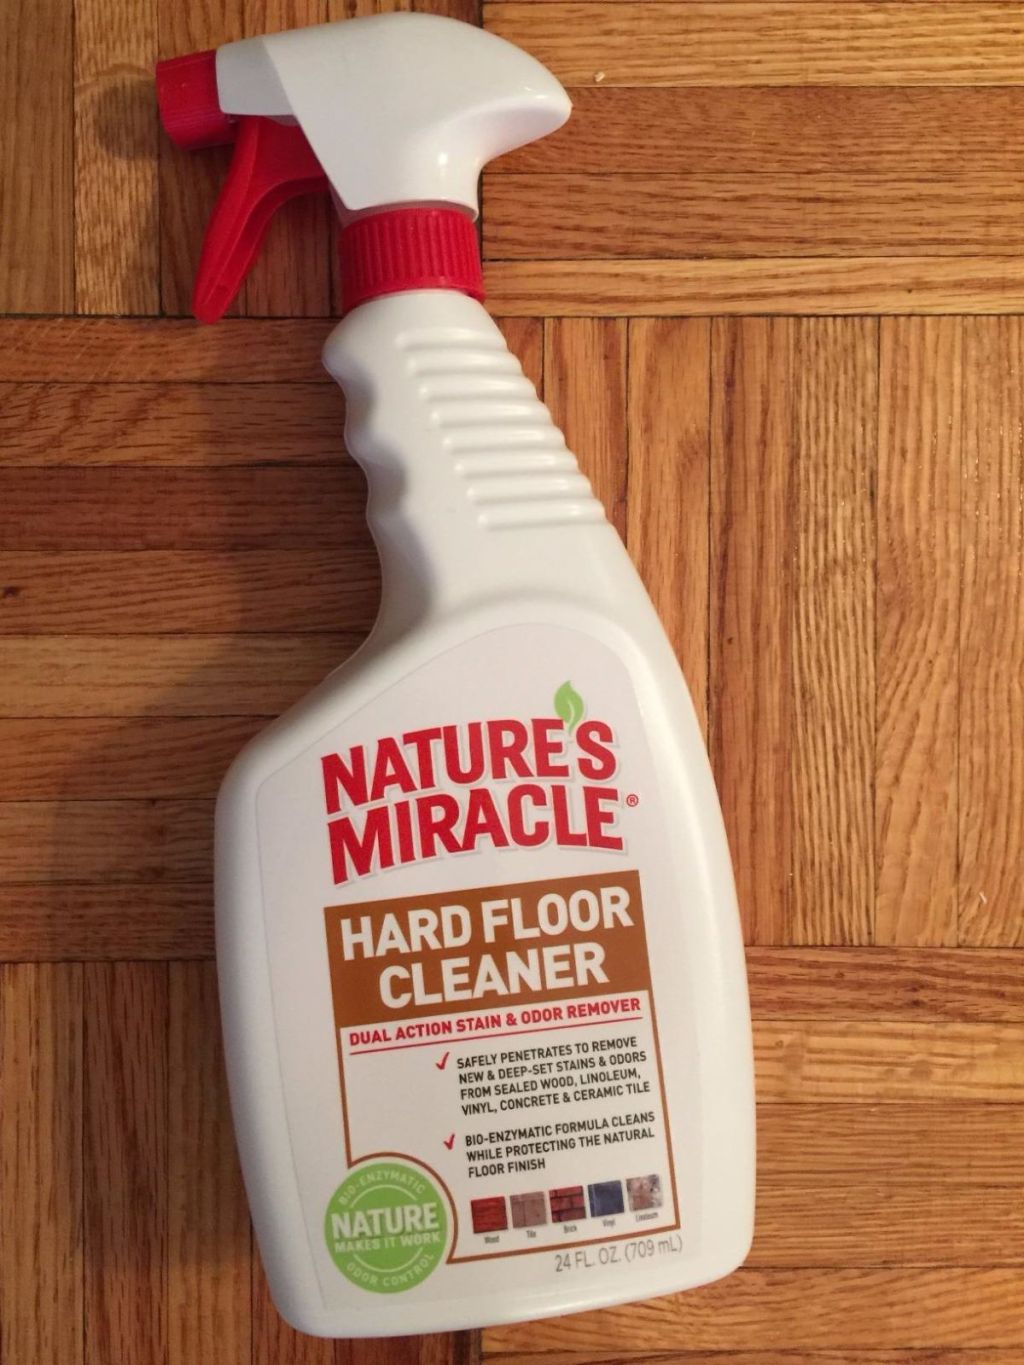 bottle of Nature's Miracle Hard Floor Cleaner